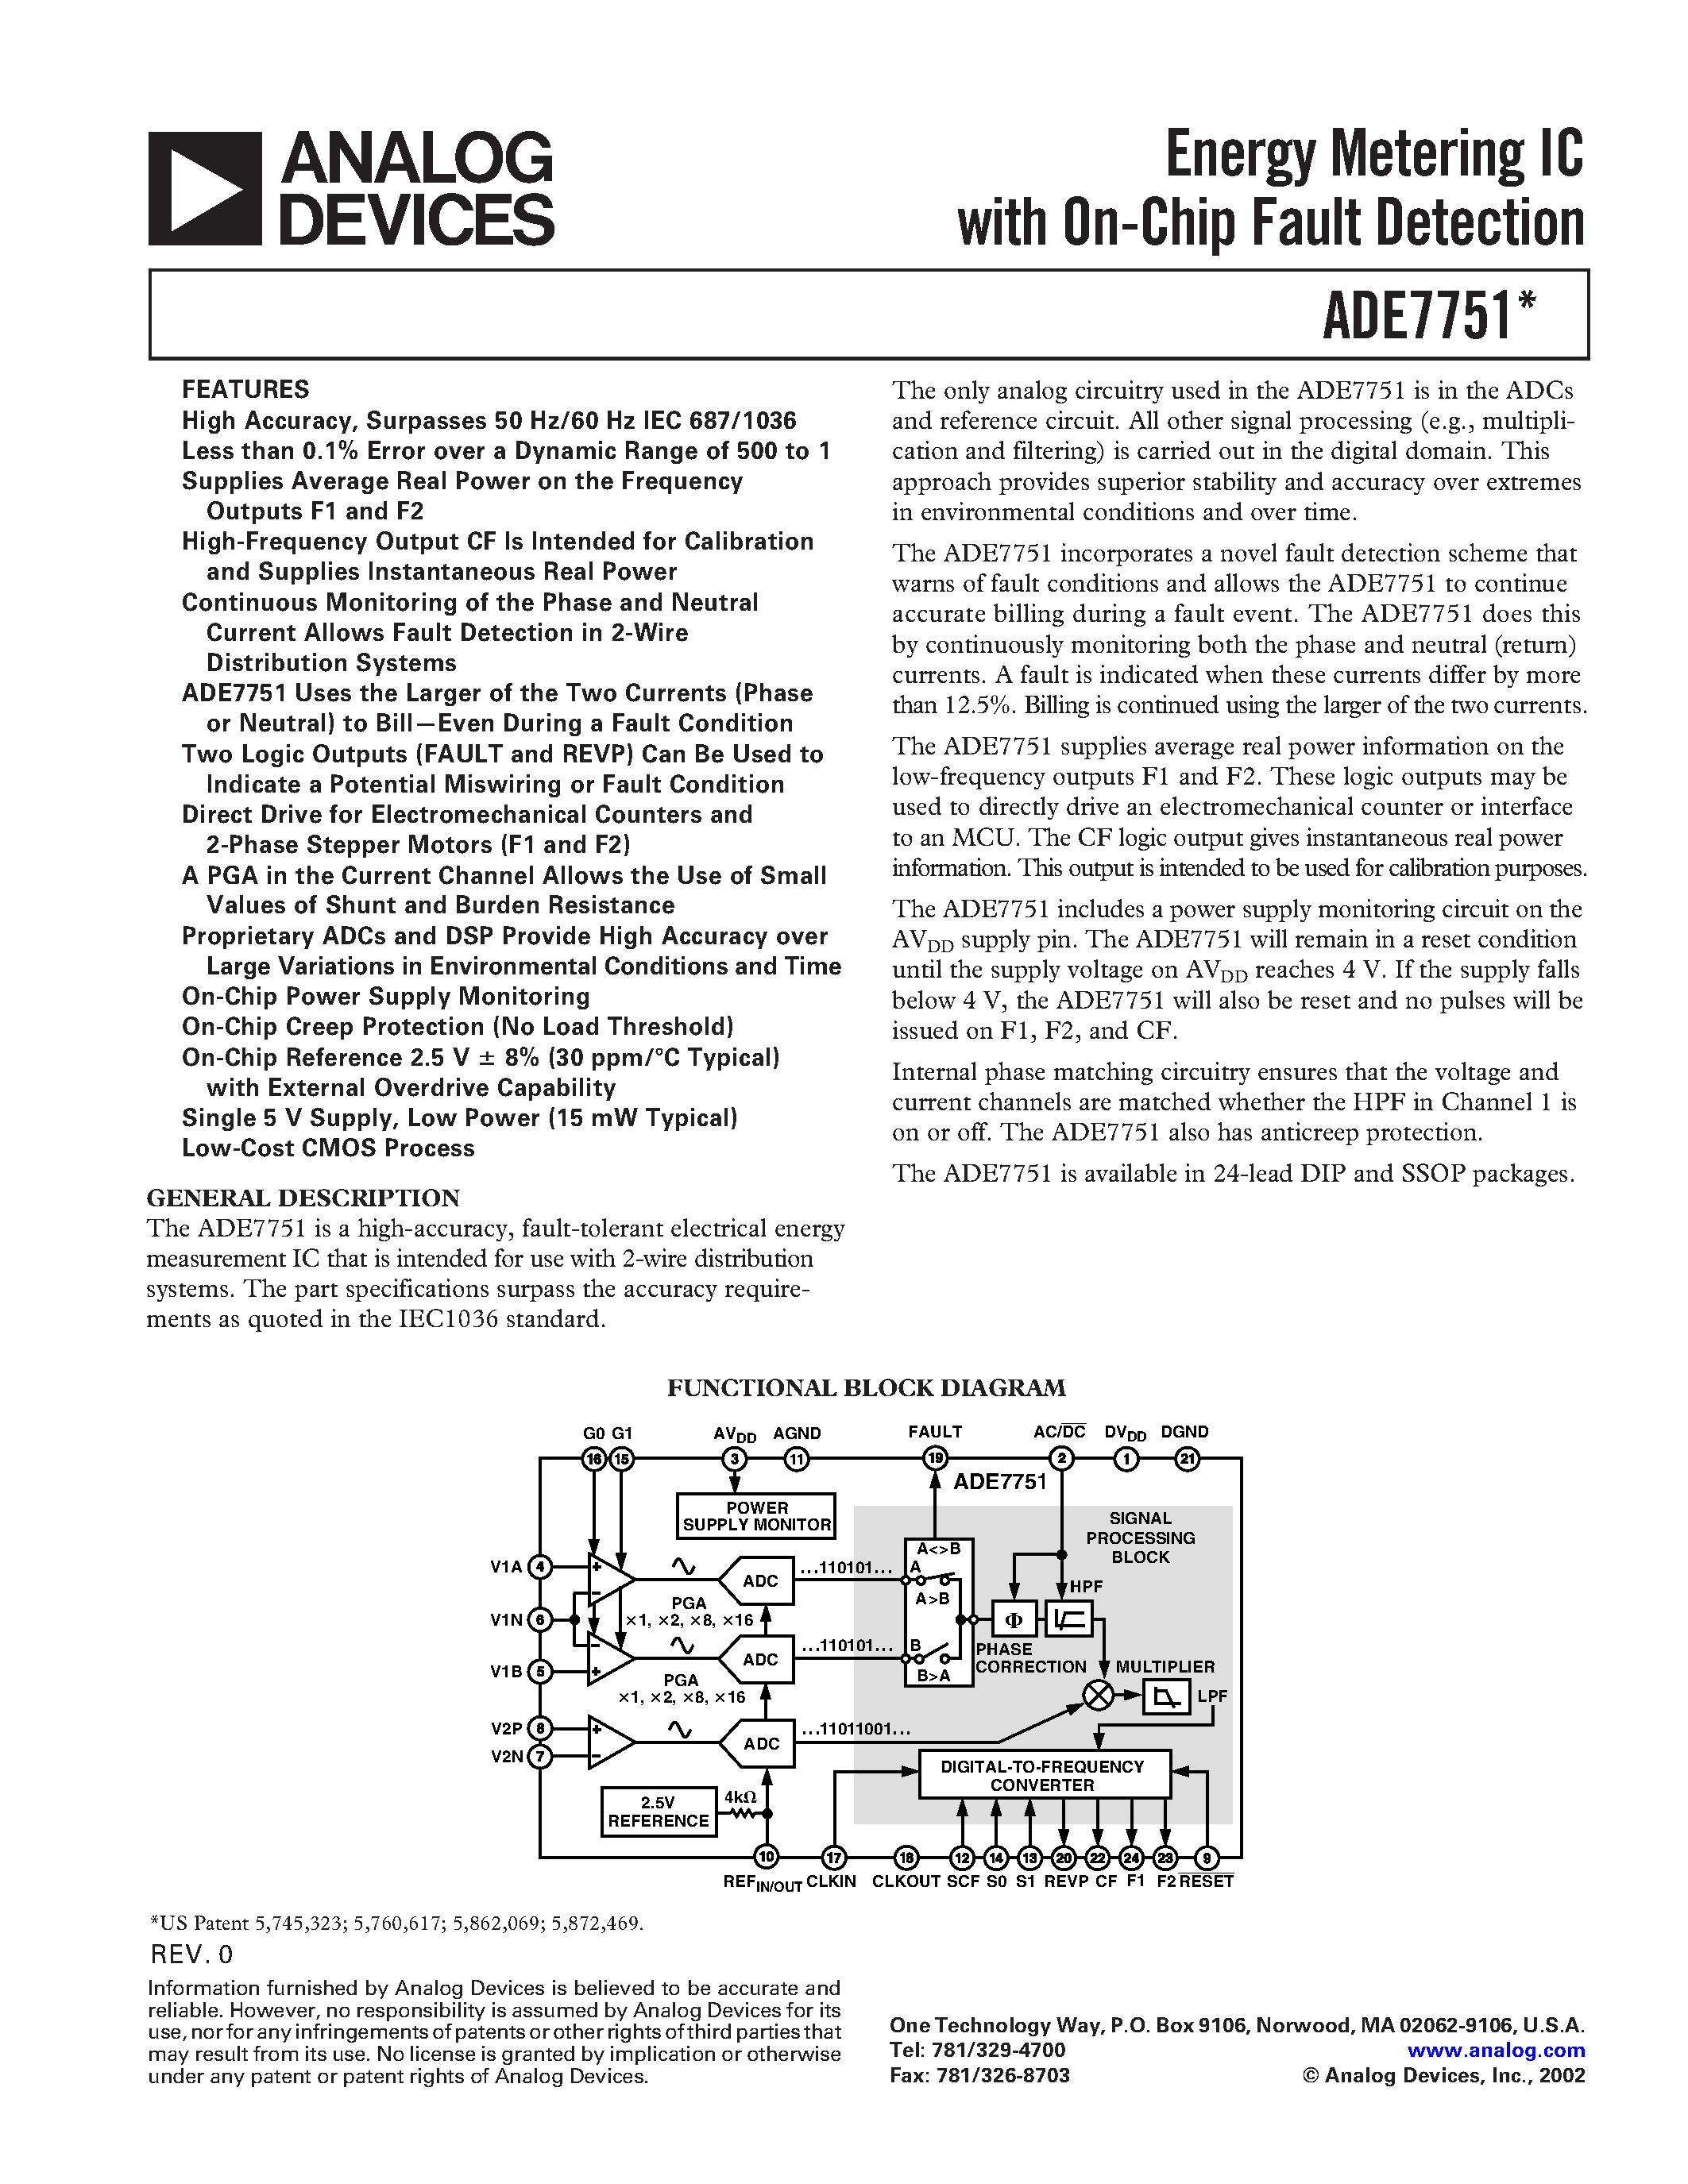 Даташит ADE7751 - Energy Metering IC with On-Chip Fault Detection страница 1